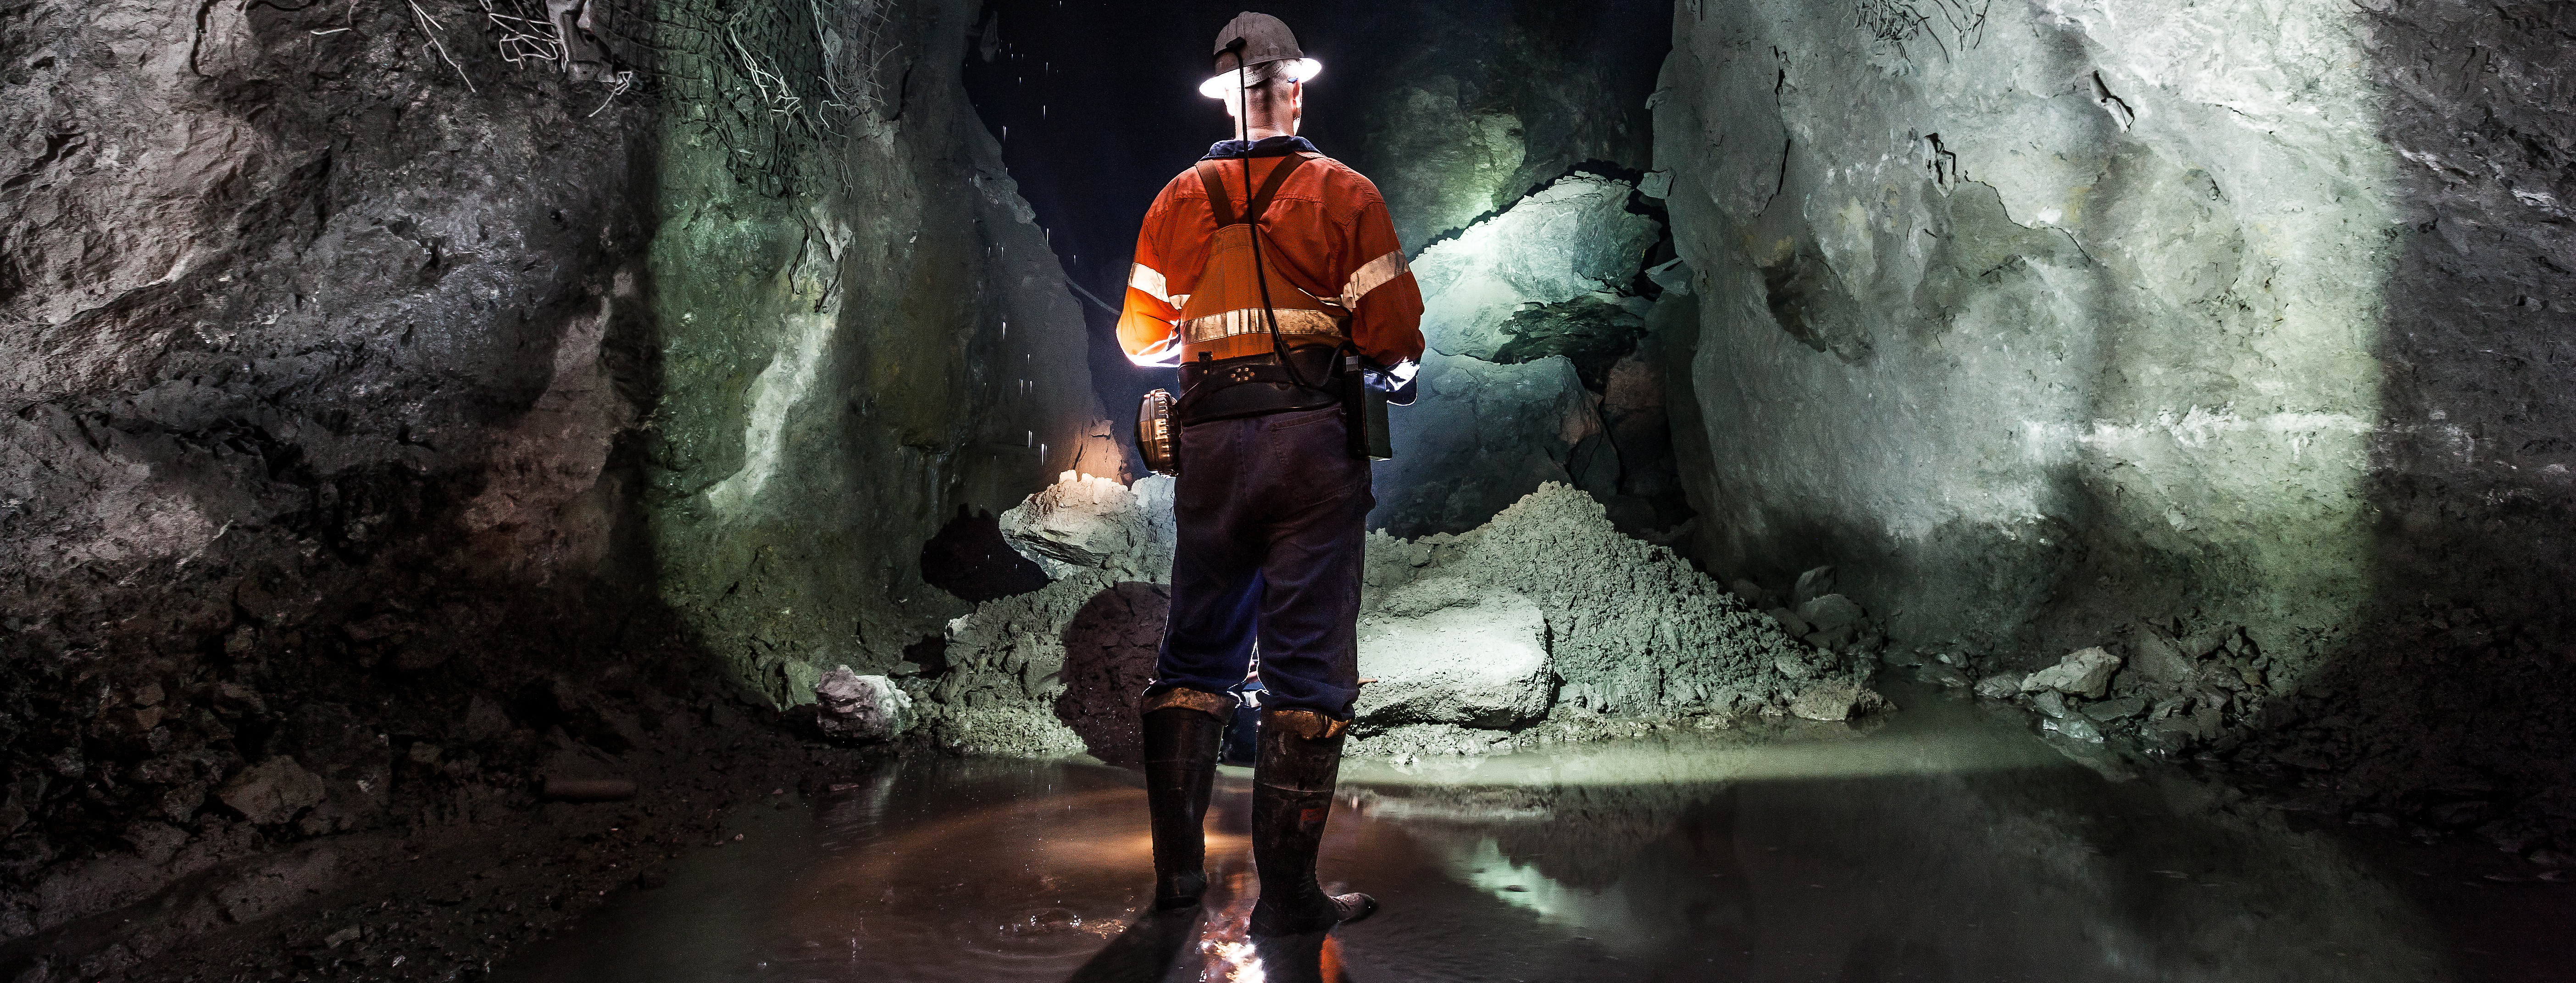 A miner inside a copper mine, standing in flooded water, emphasizing the critical role of mining pumps for effective mine dewatering.